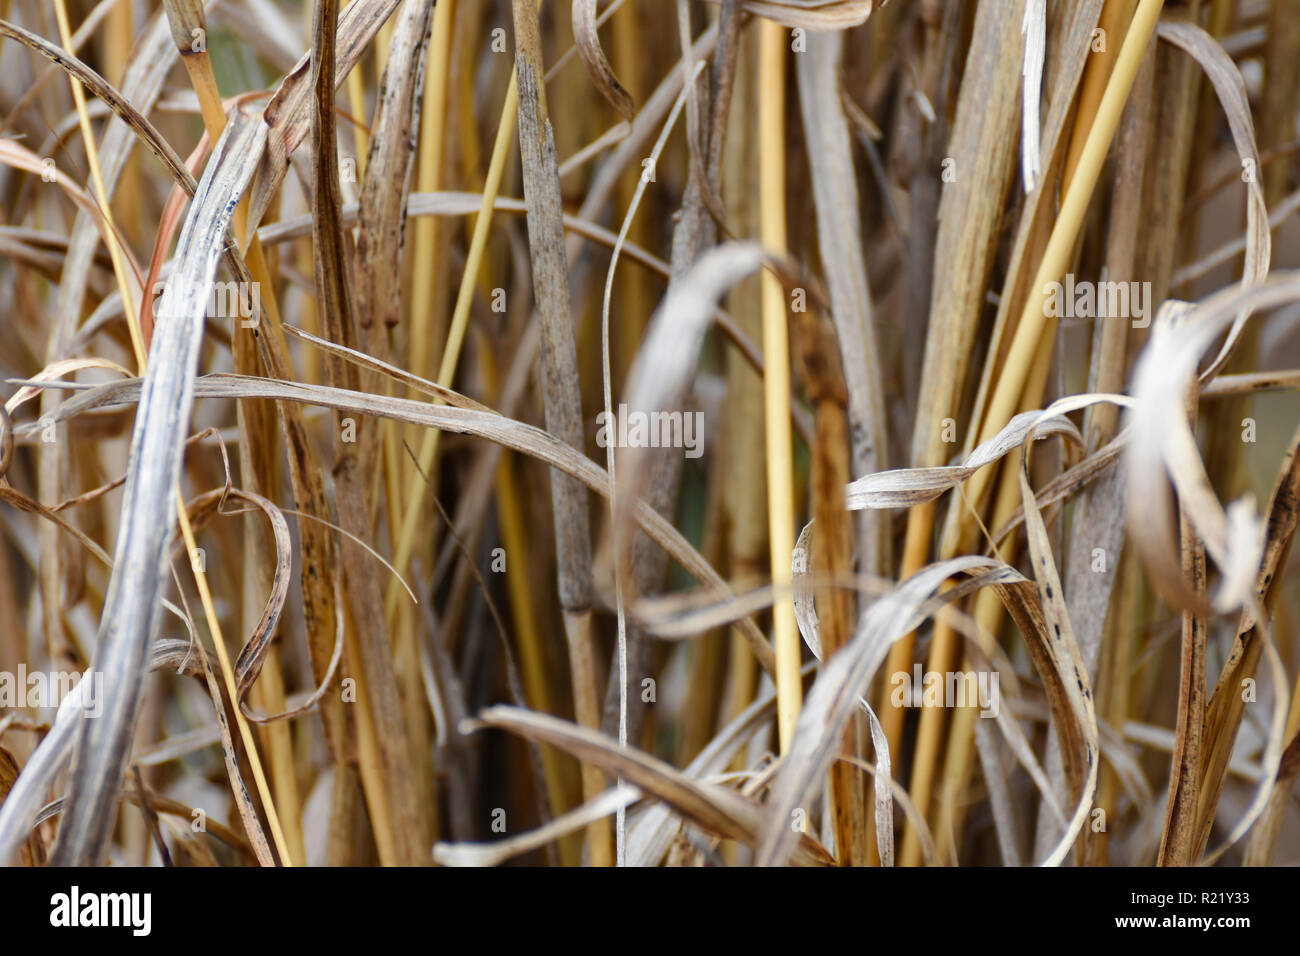 Clump Of Rough Dry Yellow Thatching Grass (hyperthelia dissoluta) Close-up Stock Photo